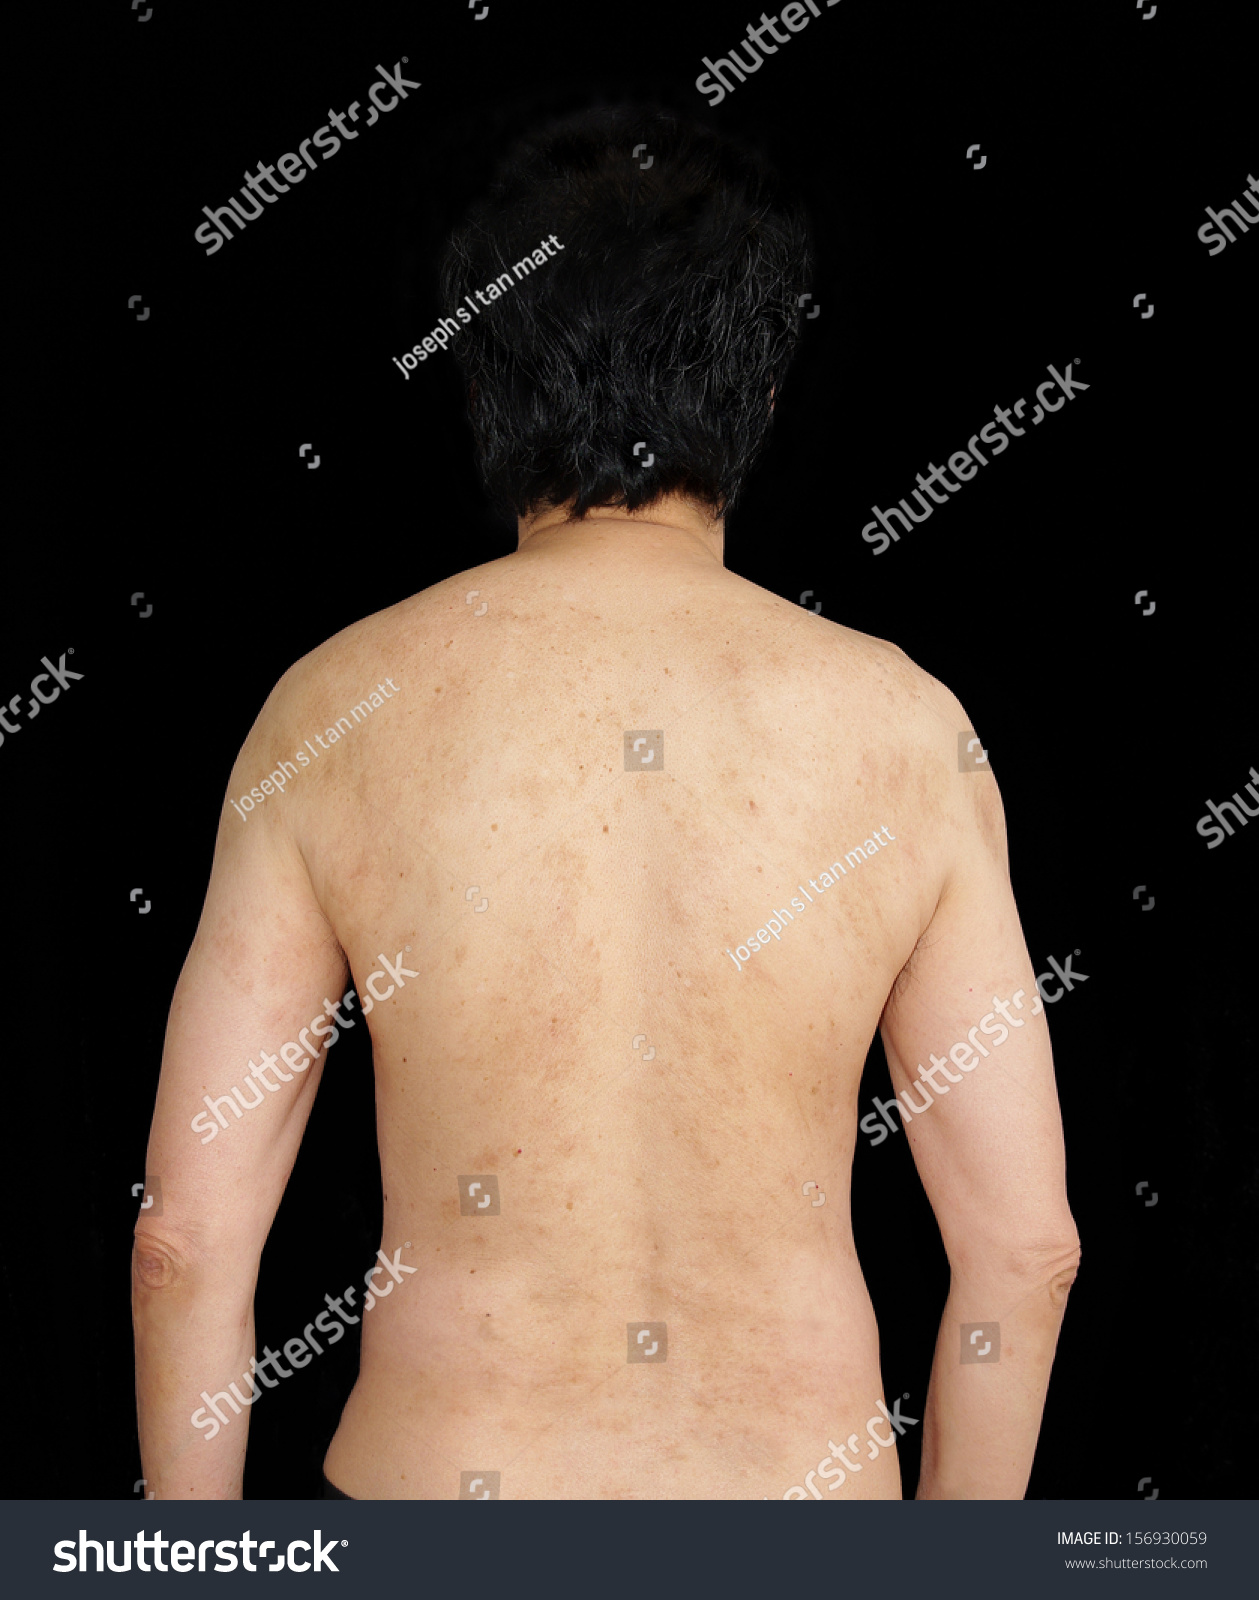 Body Parts Rear View Human Back Stock Photo 156930059 - Shutterstock